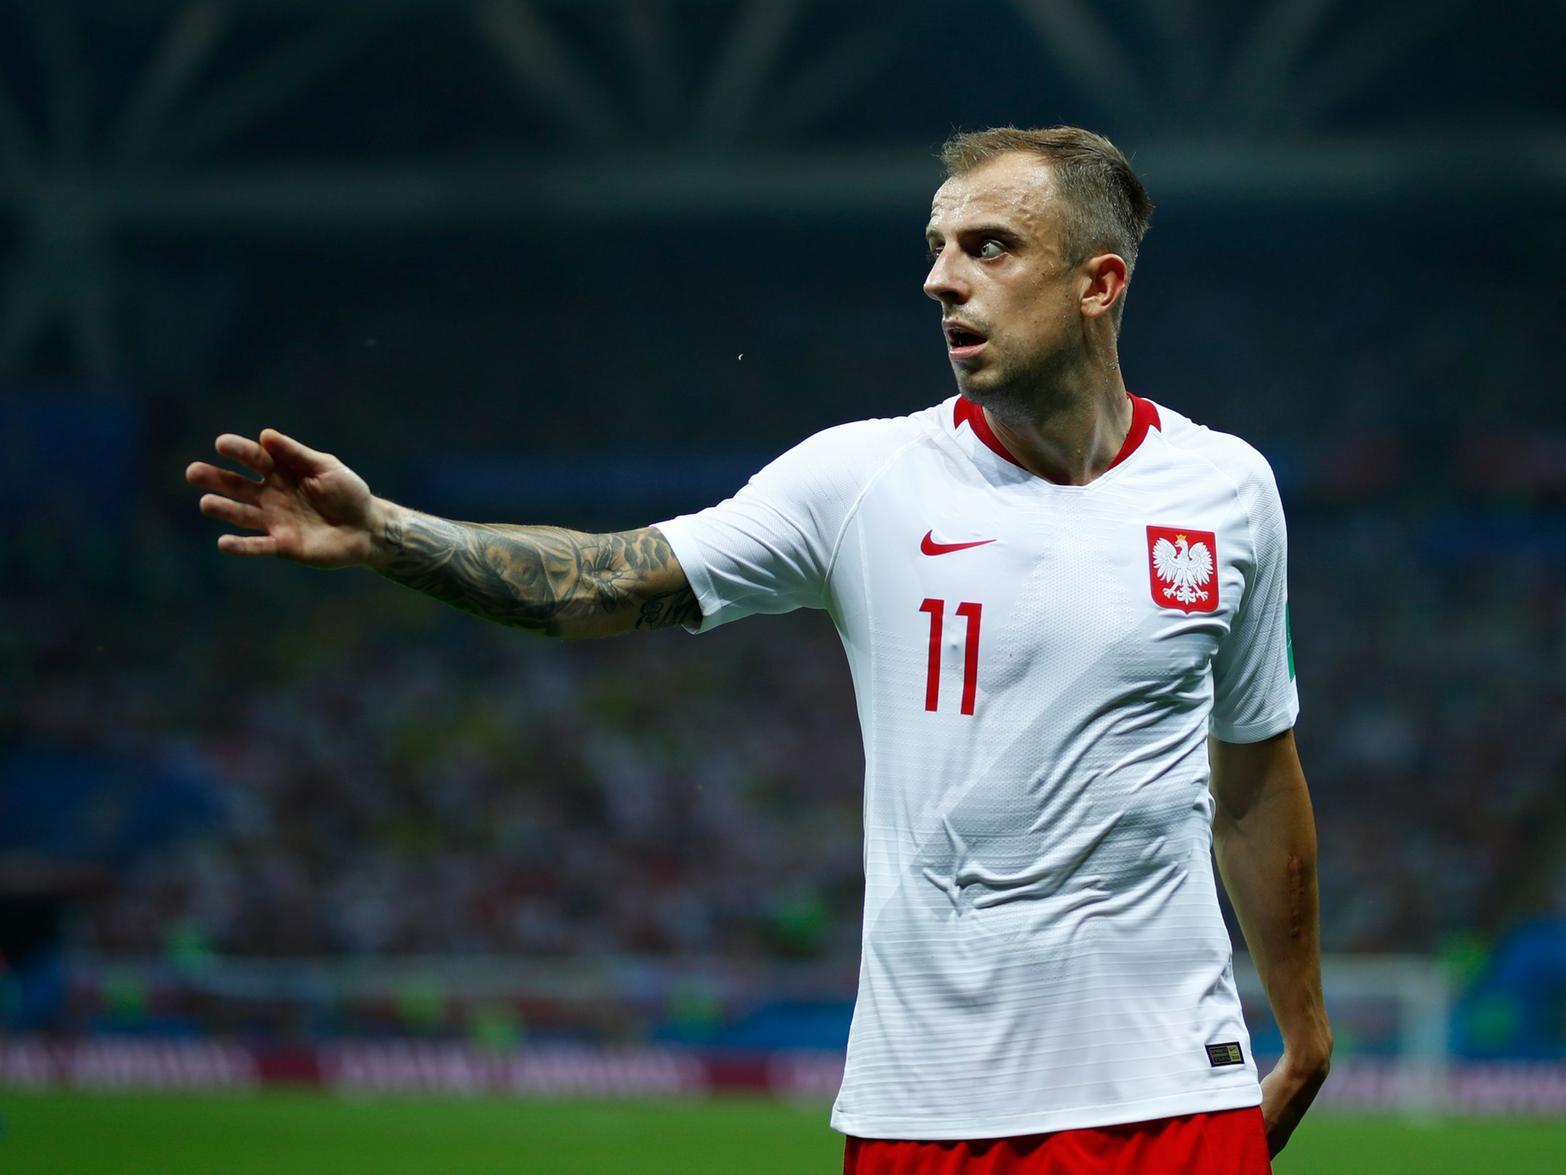 Turkish side Trabzonspor are said to be preparing a January raid for Hull City winger Kamil Grosicki, who has scored five goals in 19 games for his side so far this season. (Sport Witness)